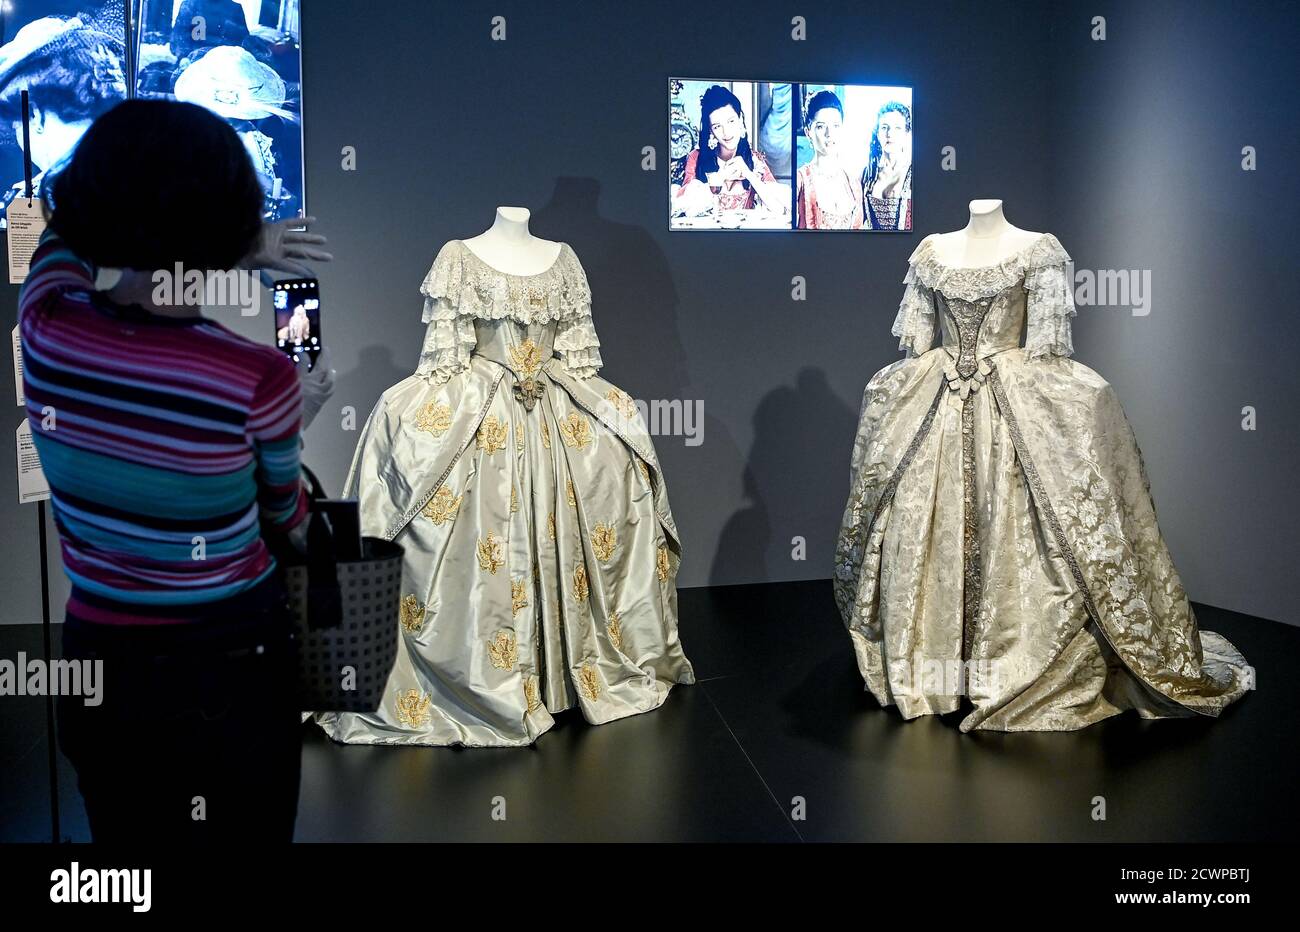 Berlin, Germany. 30th Sep, 2020. A woman photographs clothes from the film 'Catherine the Great' by Marvin J. Chomsky, and John Goldsmith in the exhibition 'Hautnah. The Film Costumes of Barbara Baum' at the Deutsche Kinemathek - Museum für Film und Fernsehen. From 01.10. 2020 to 03.05.2021 over 40 original film costumes from five decades of costume design will be shown. Credit: Britta Pedersen/dpa-Zentralbild/dpa - ATTENTION: Only for editorial use in connection with current reporting and only with full mention of the above credit/dpa/Alamy Live News Stock Photo